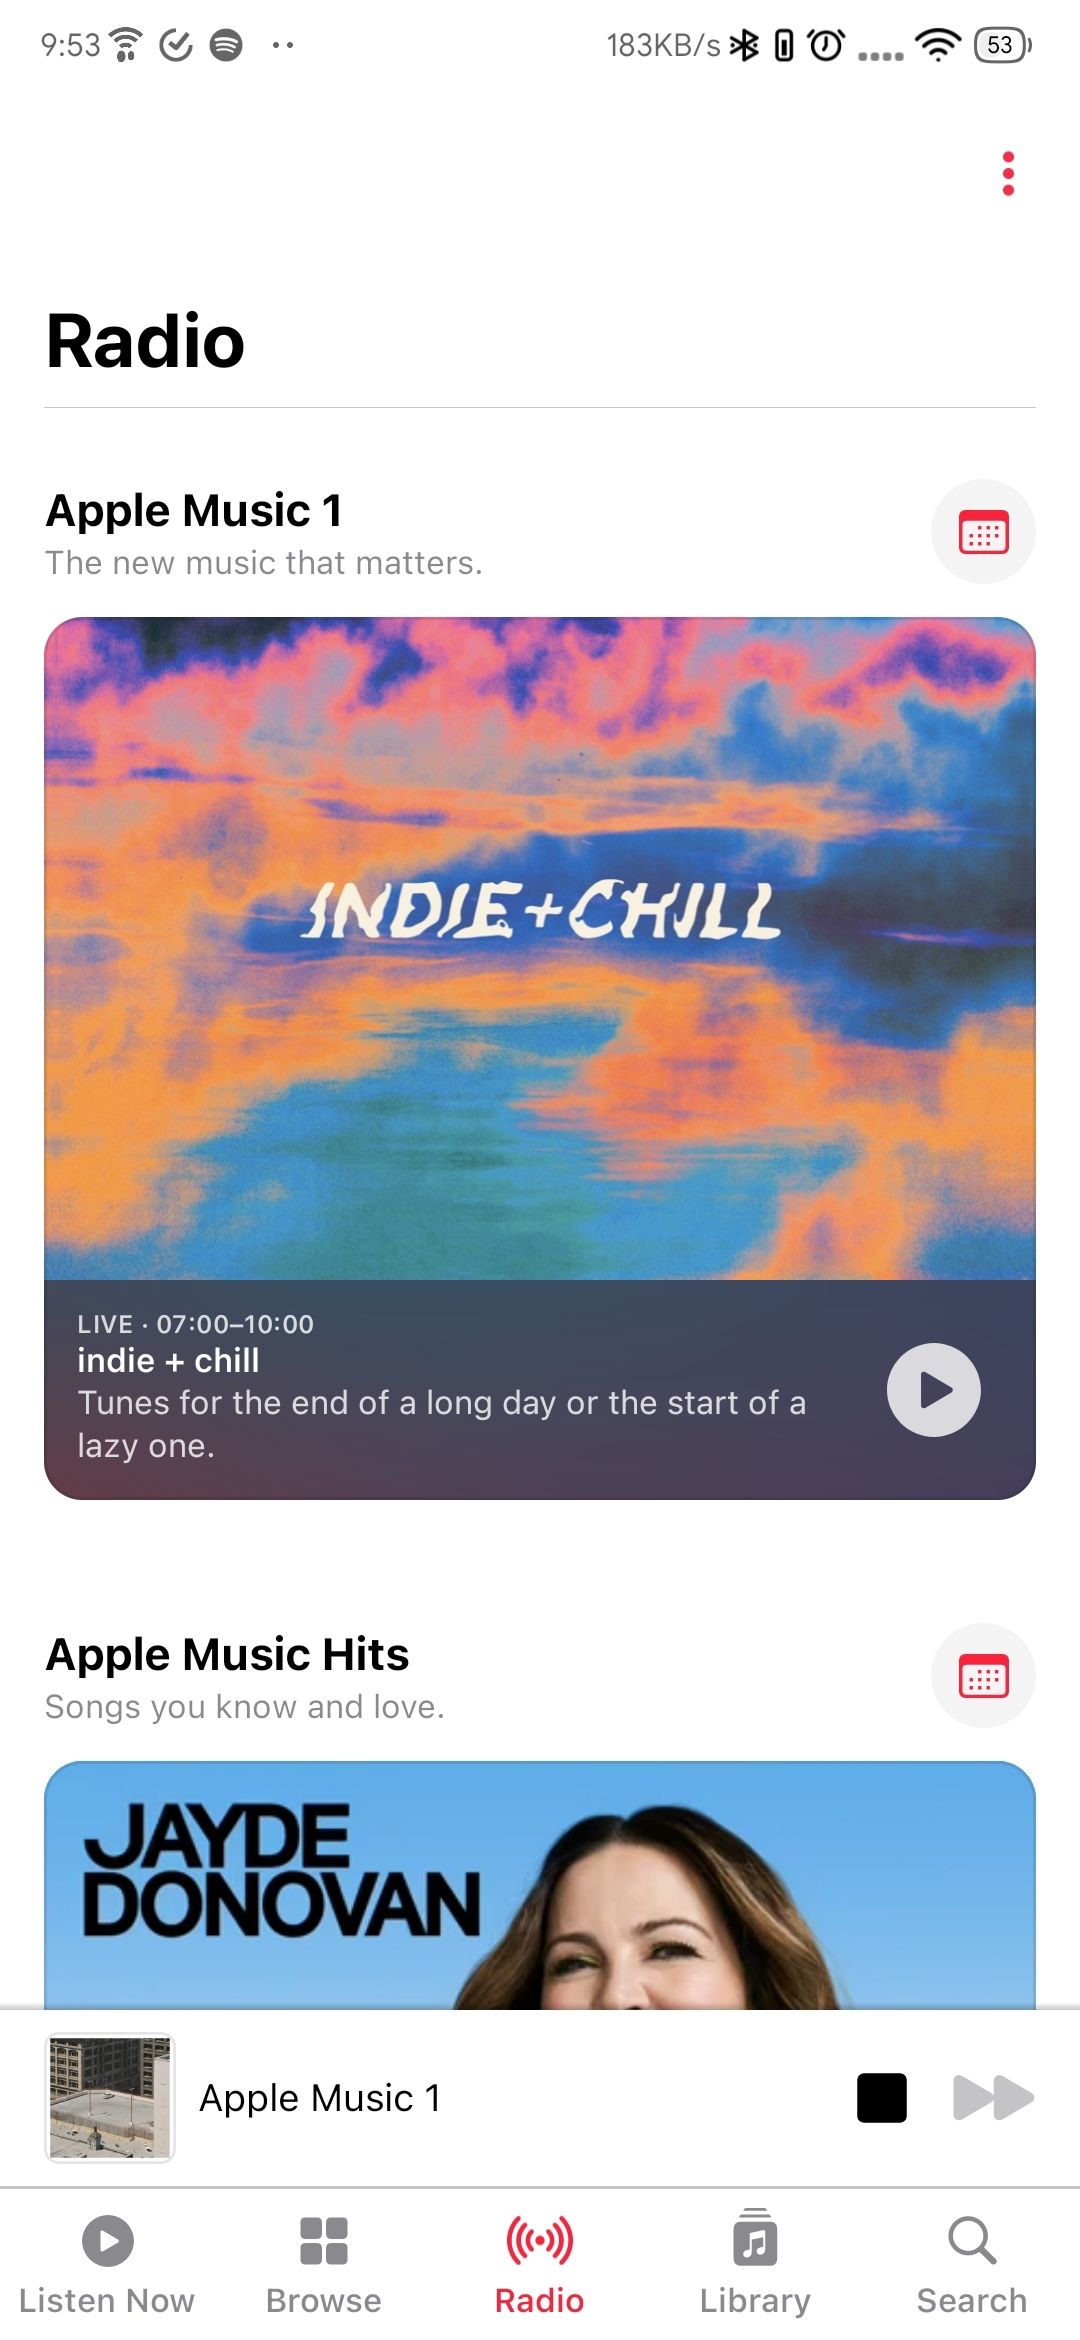 Playing a station on Apple Music